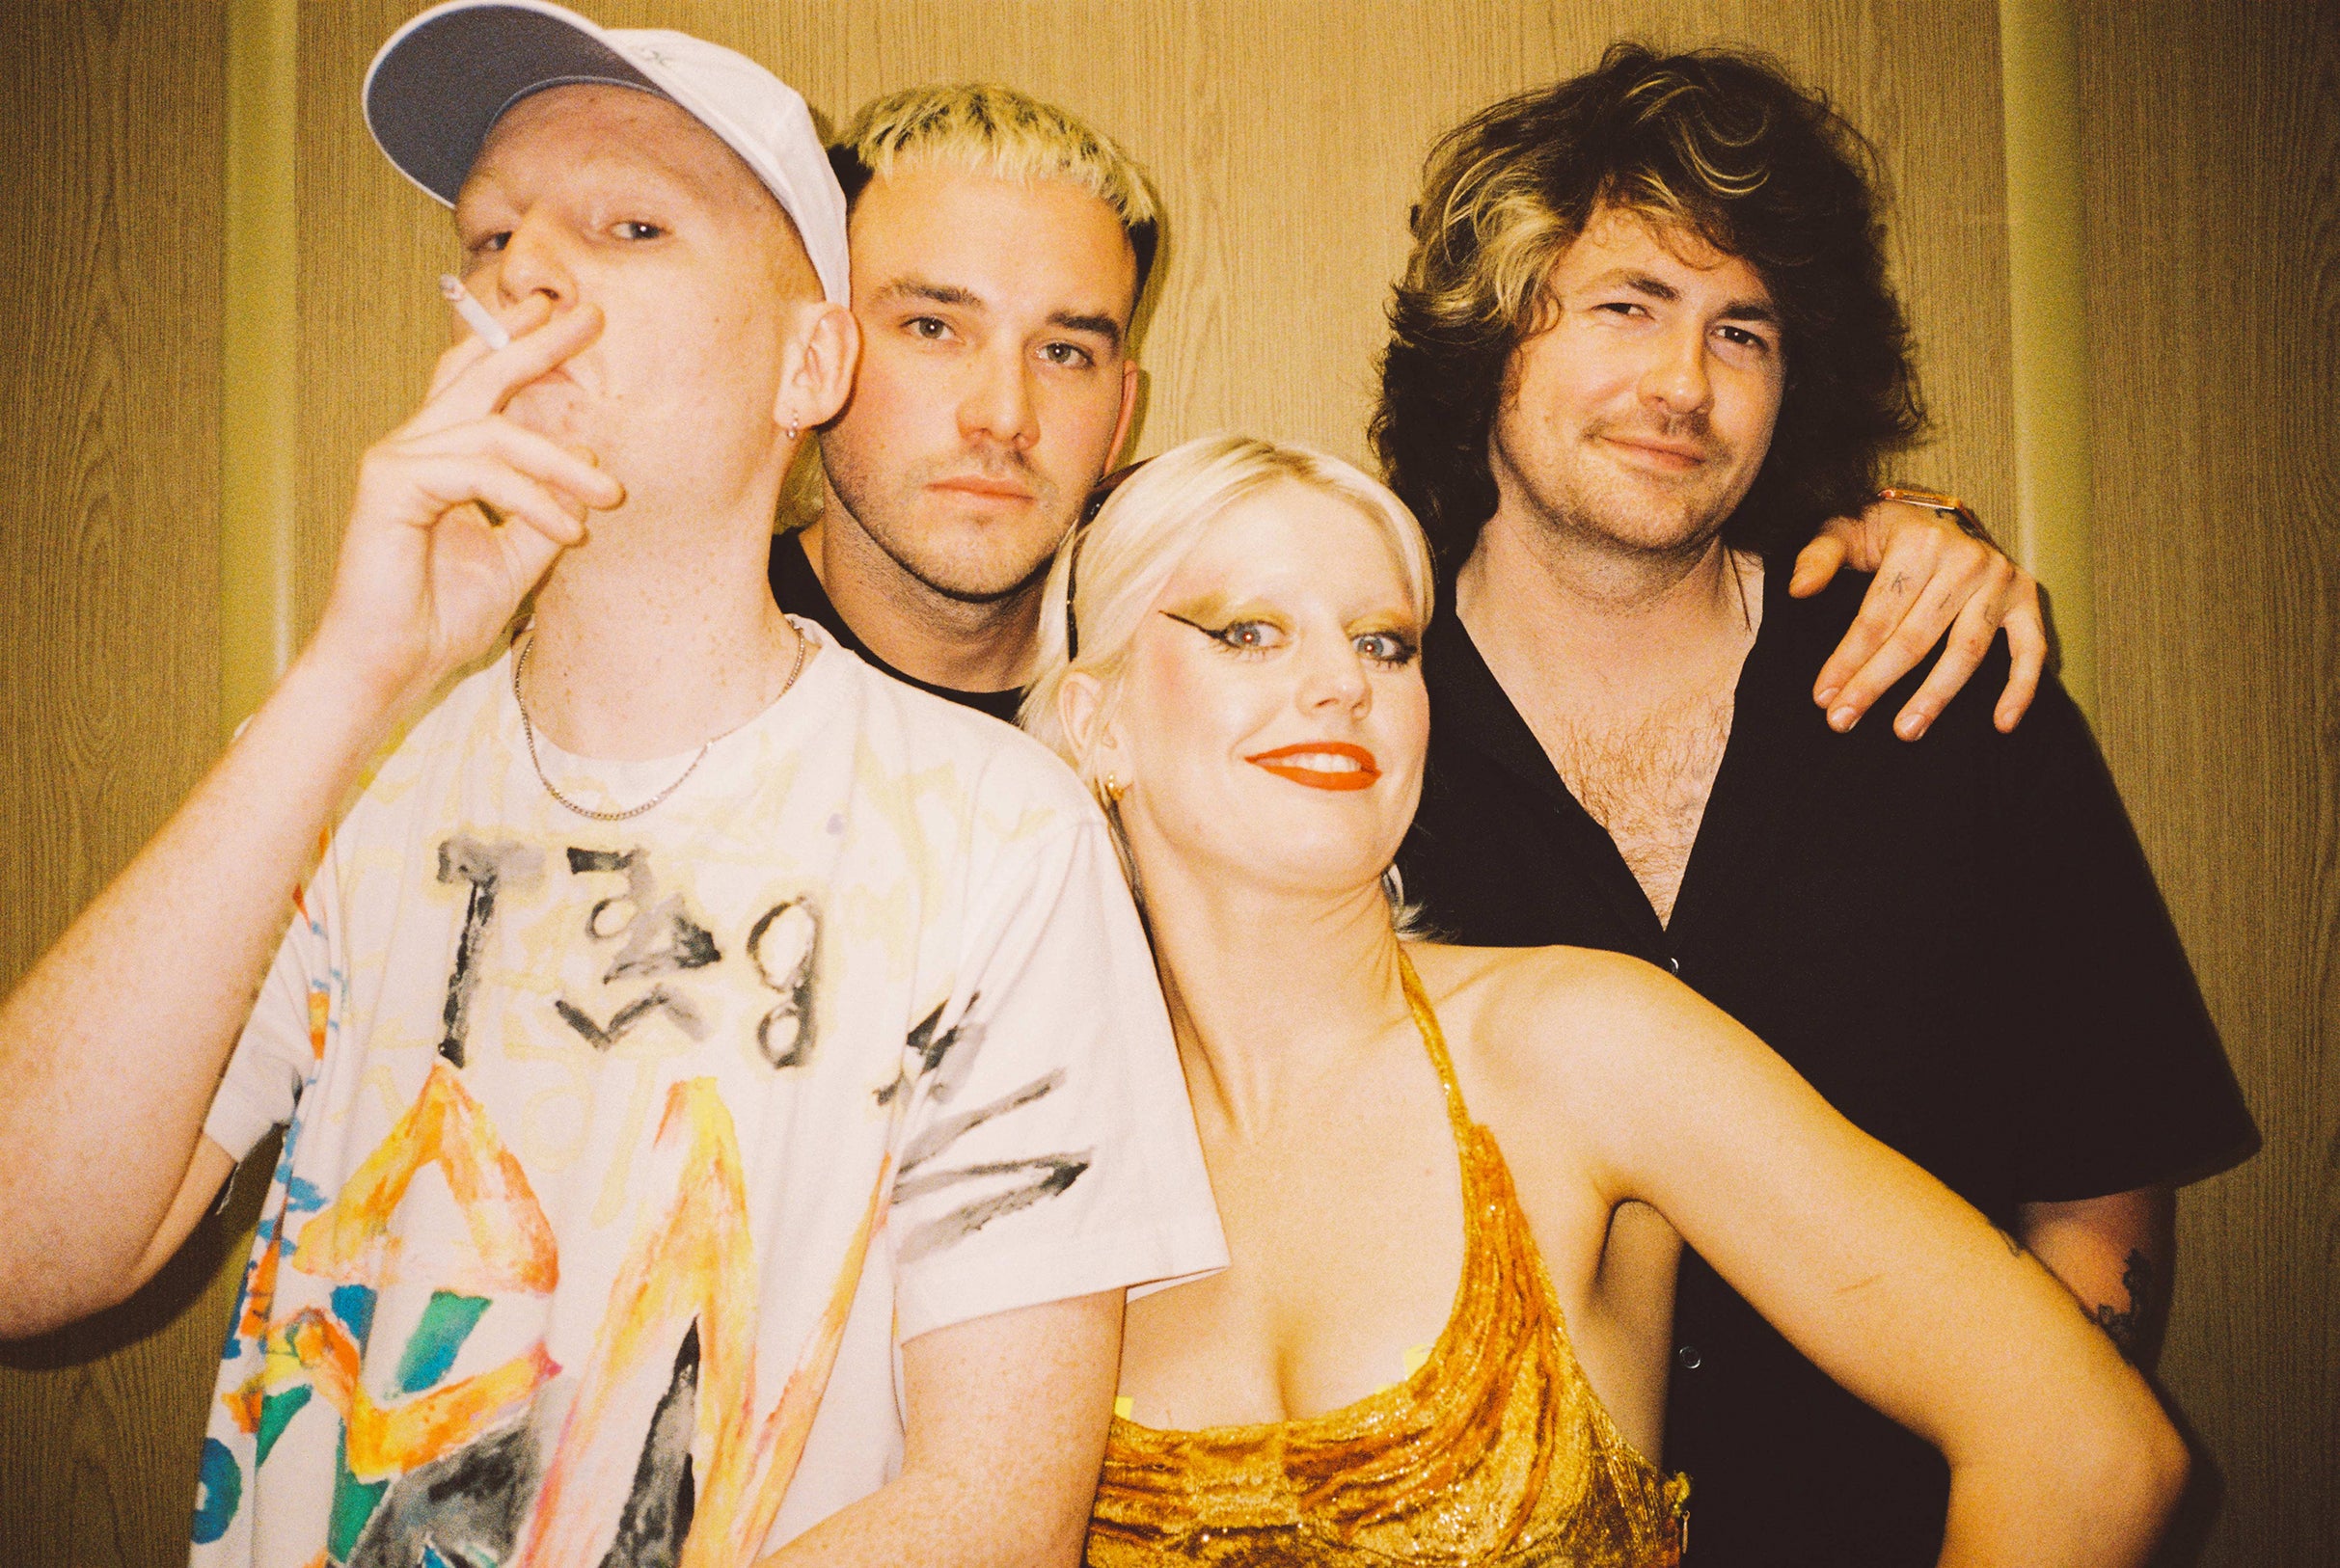 Amyl and the Sniffers in Del Mar promo photo for Spotify presale offer code